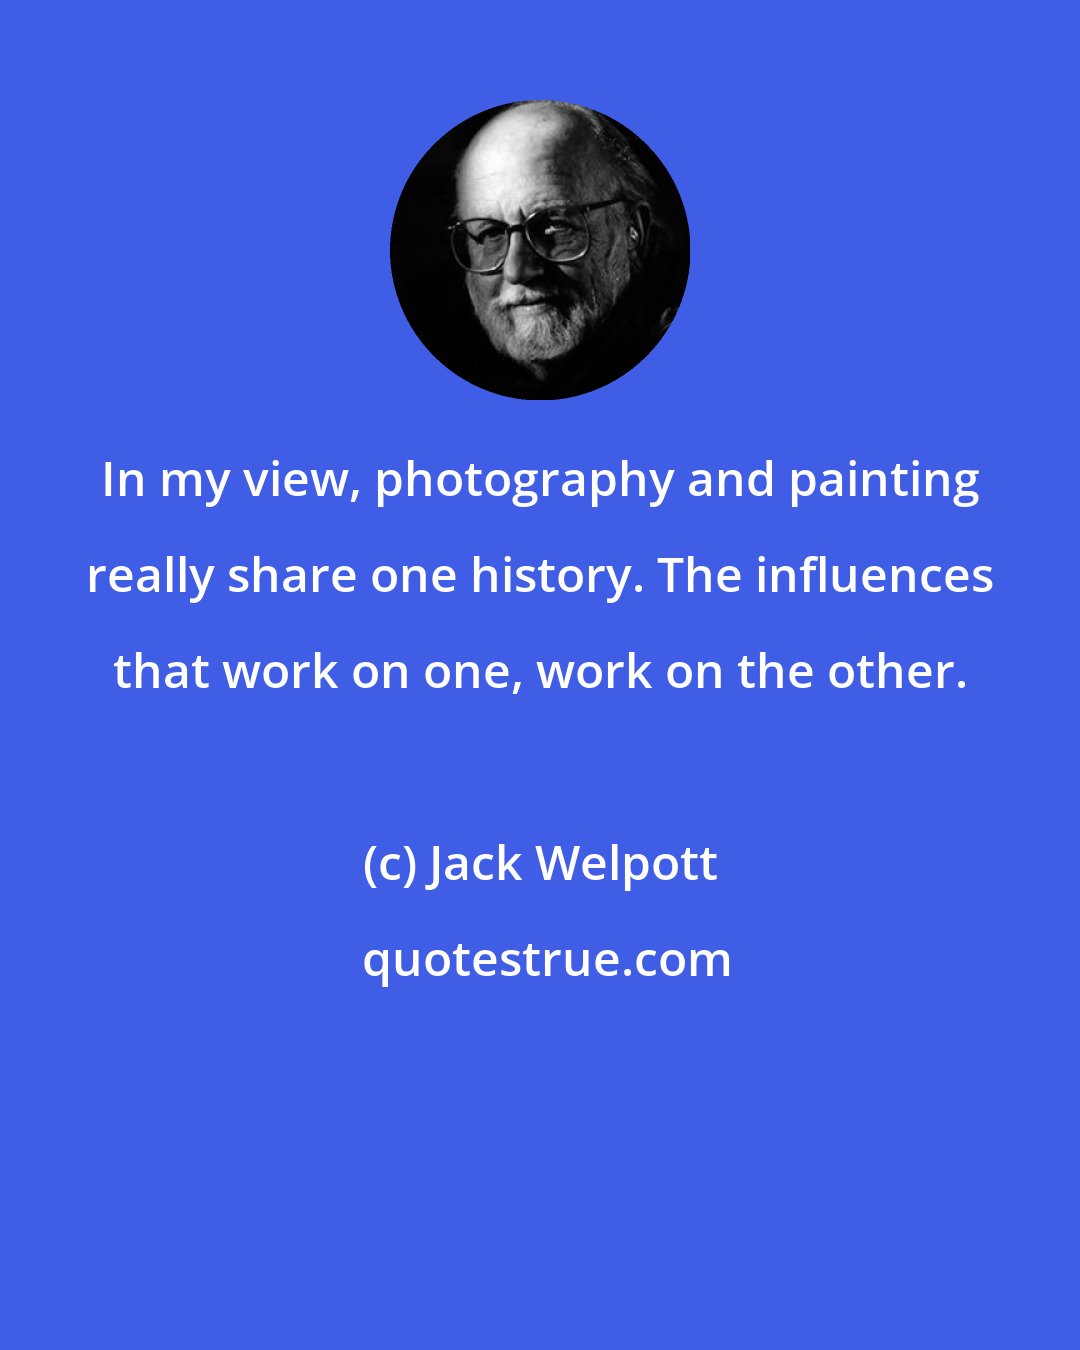 Jack Welpott: In my view, photography and painting really share one history. The influences that work on one, work on the other.